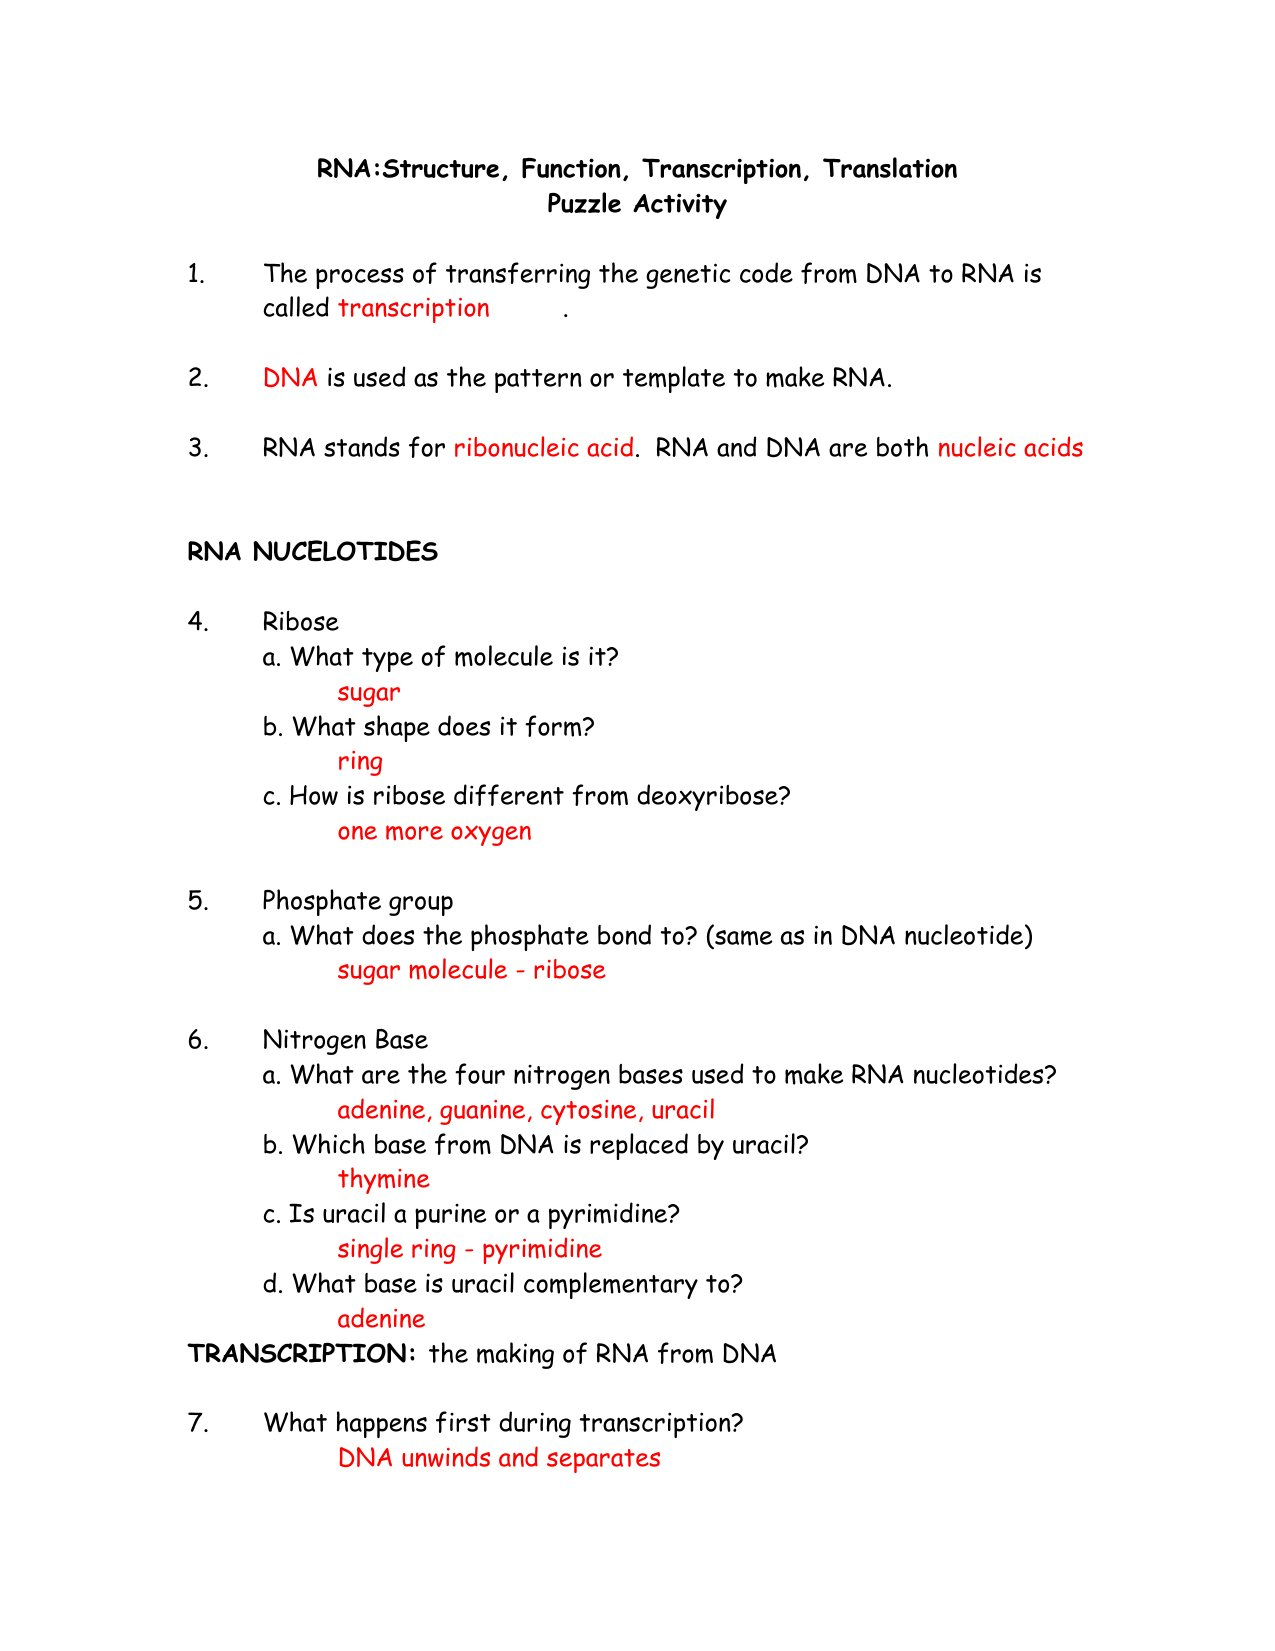 Coloring Dna Worksheet Answers Also Dna Coloring Worksheet Key